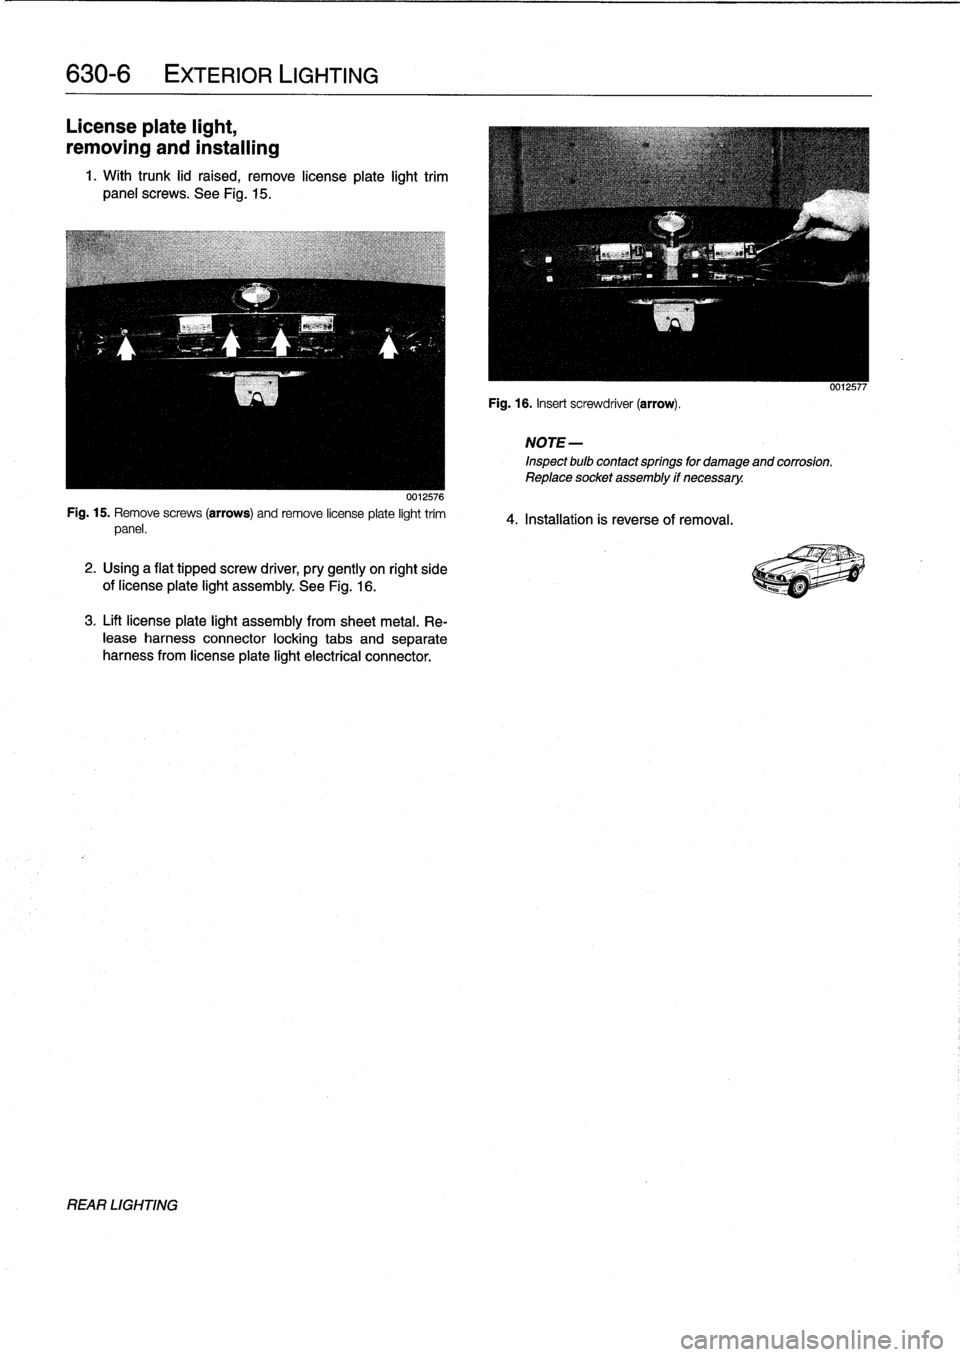 BMW 325i 1994 E36 Workshop Manual 
630-
6

	

EXTERIOR
LIGHTING

License
plate
light,

removing
and
installing

1
.
With
trunk
lid
raised,
remove
lícense
plate
light
trim
panel
screws
.
See
Fig
.
15
.

0012576
Fig
.
15
.
Remove
screw